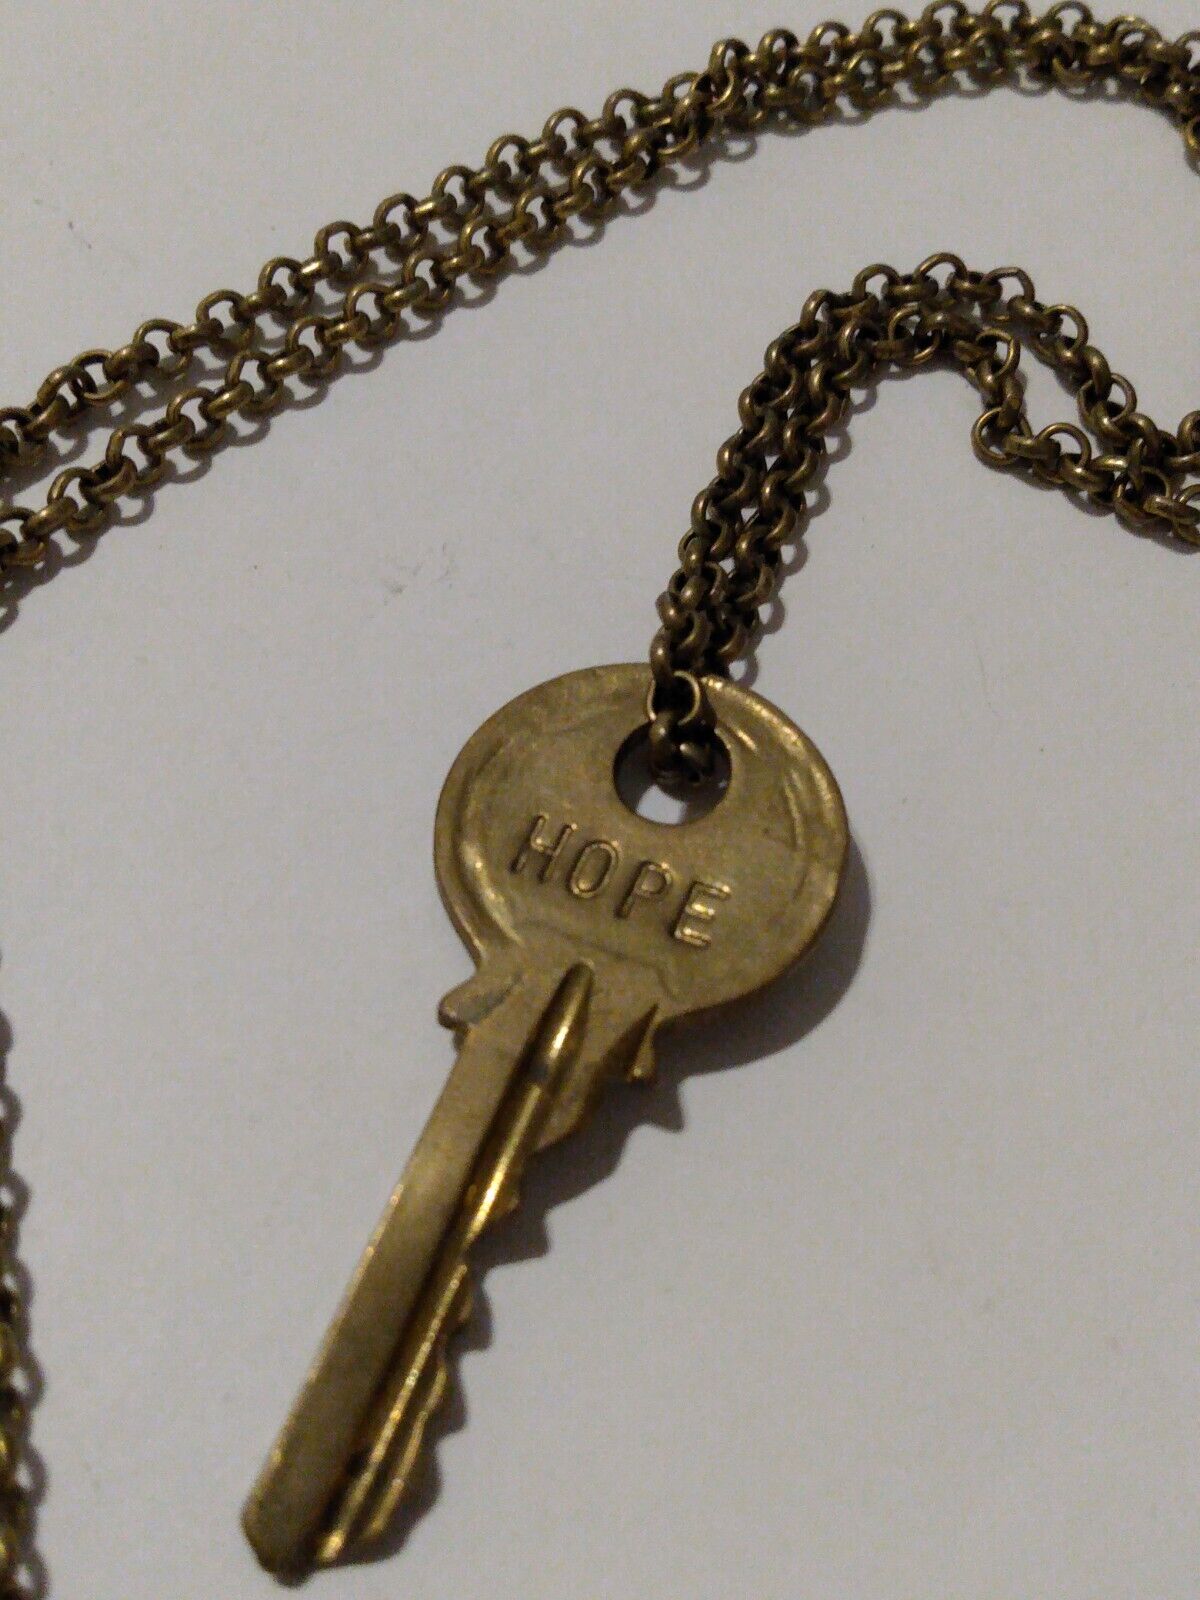 The Giving Keys HOPE Pendant Chain Necklace